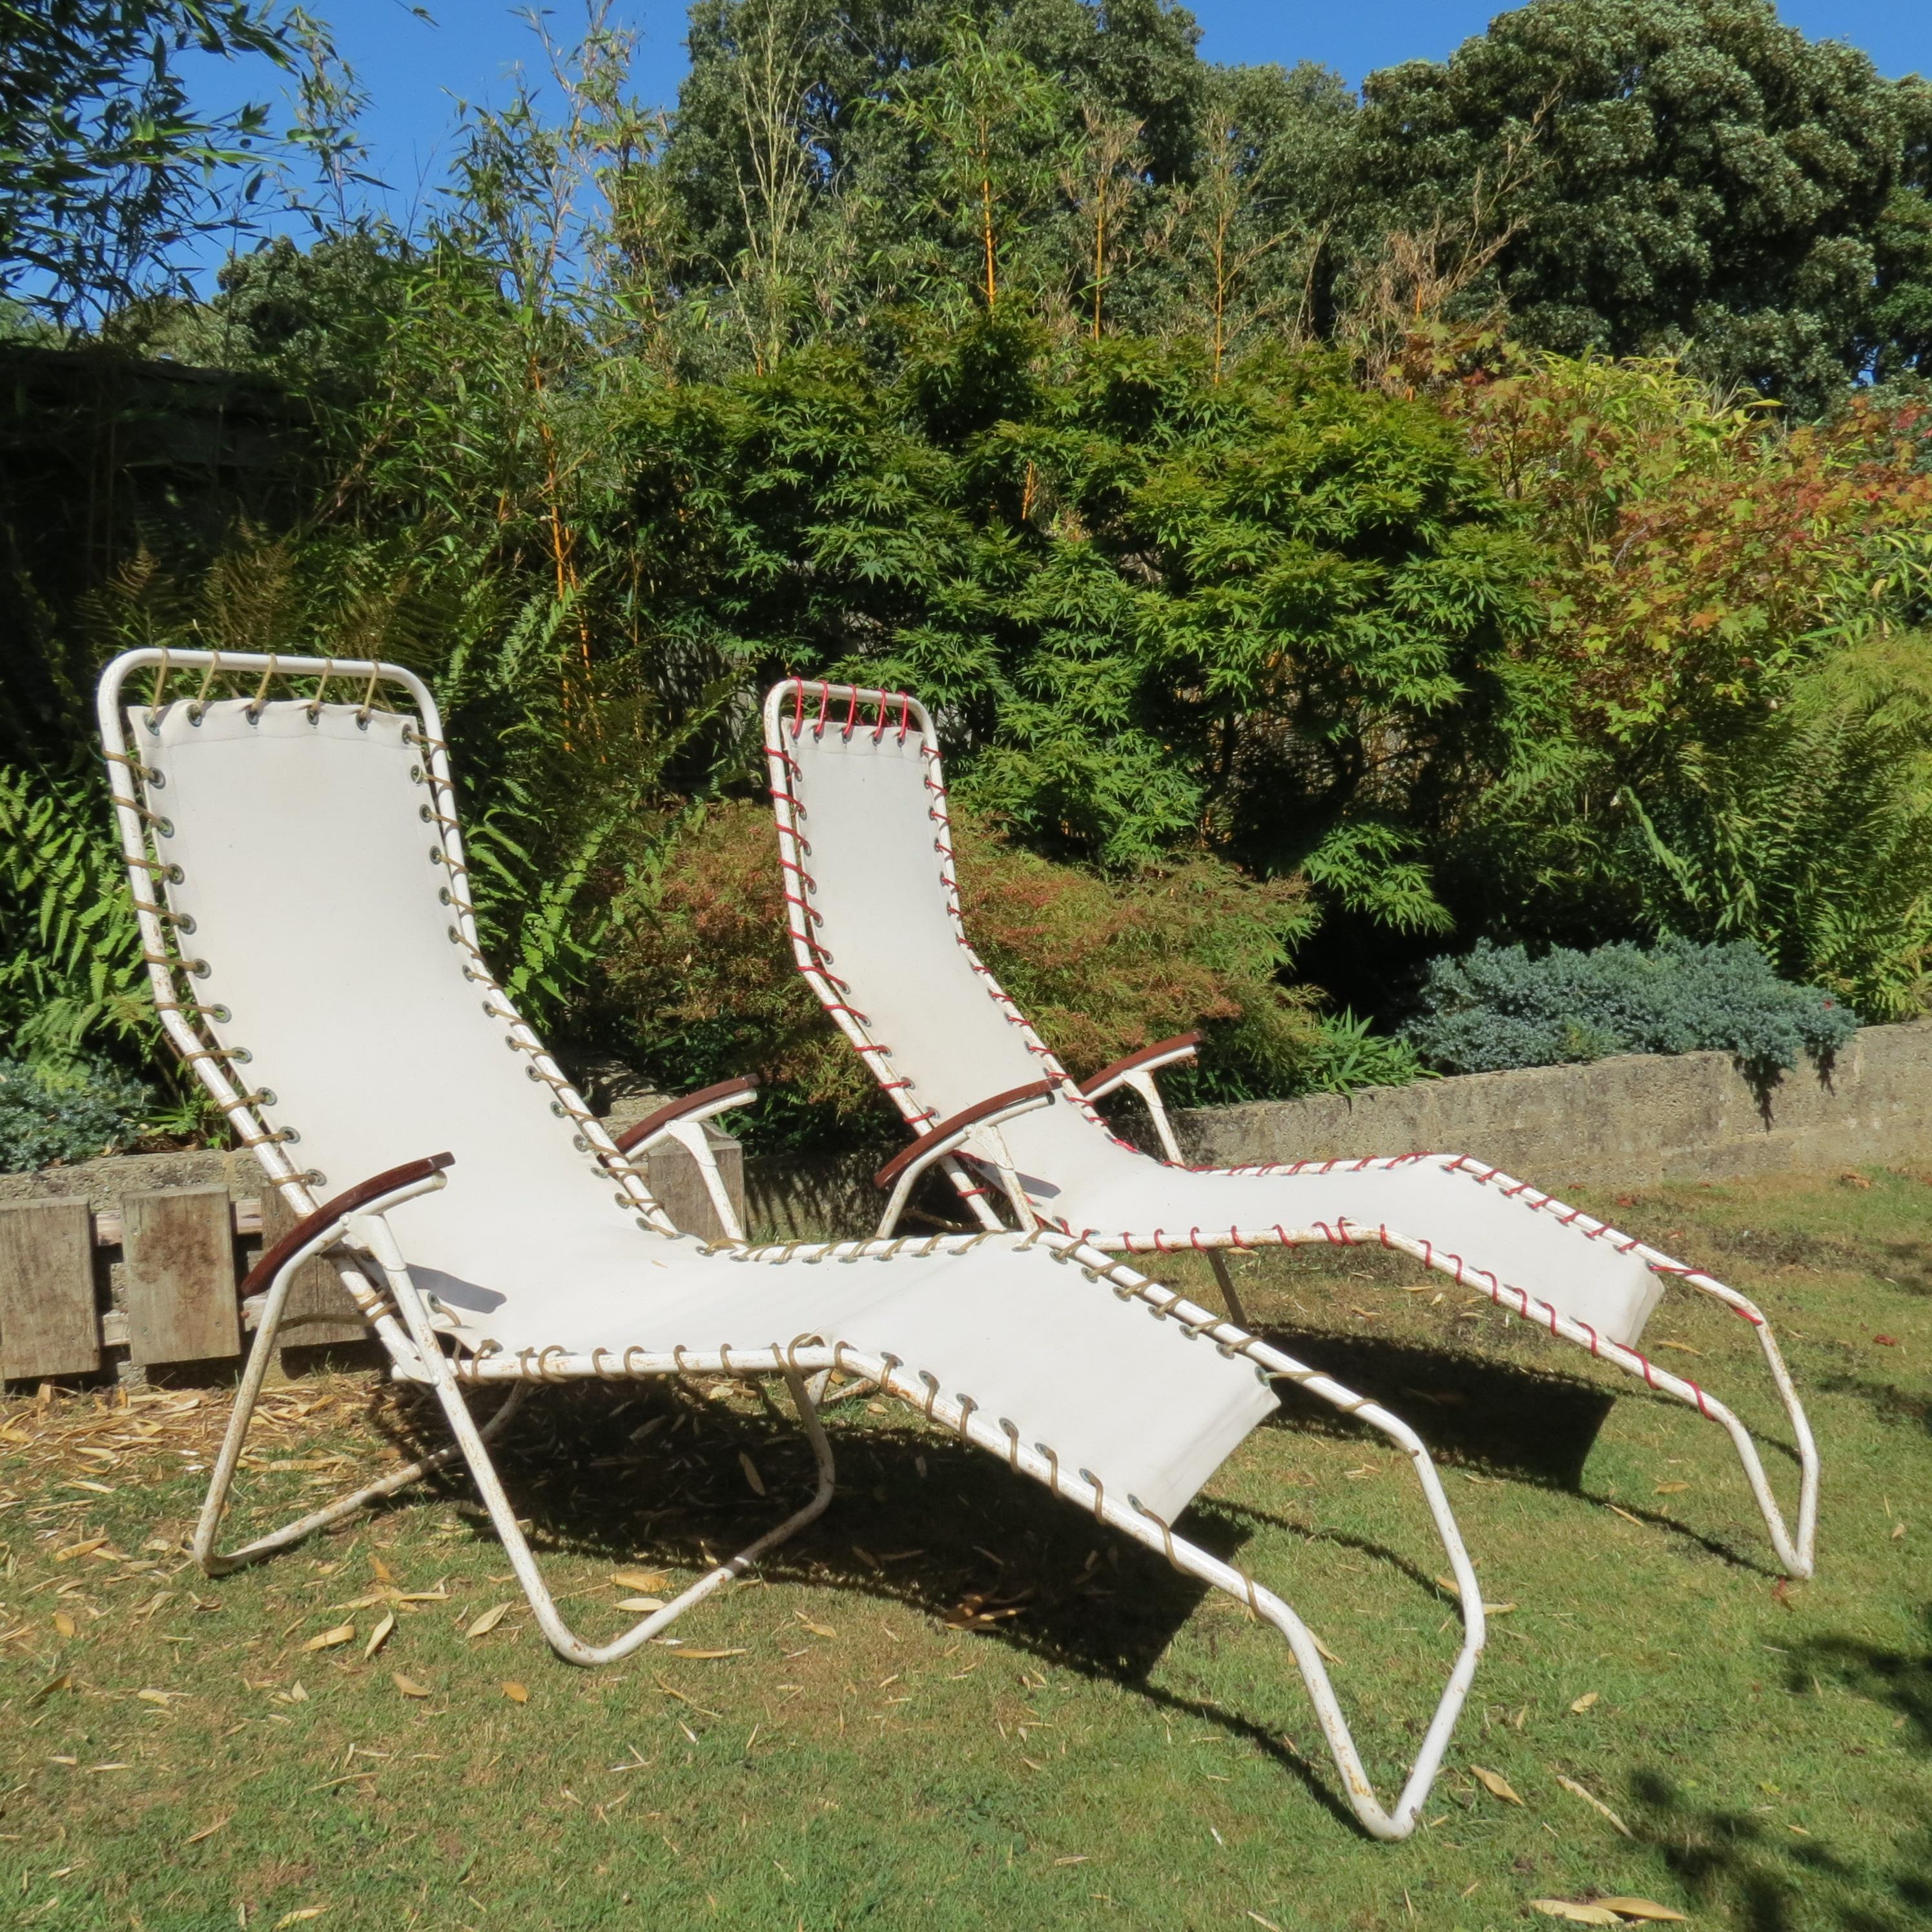 Wonderful pair of original 1970s garden lounge chairs. Metal tubular frames with distressed paint finish. Canvas seats attach to the frame with nylon cord. One of the nylon cords that attaches the seat sling to the frame has been replaced with a red